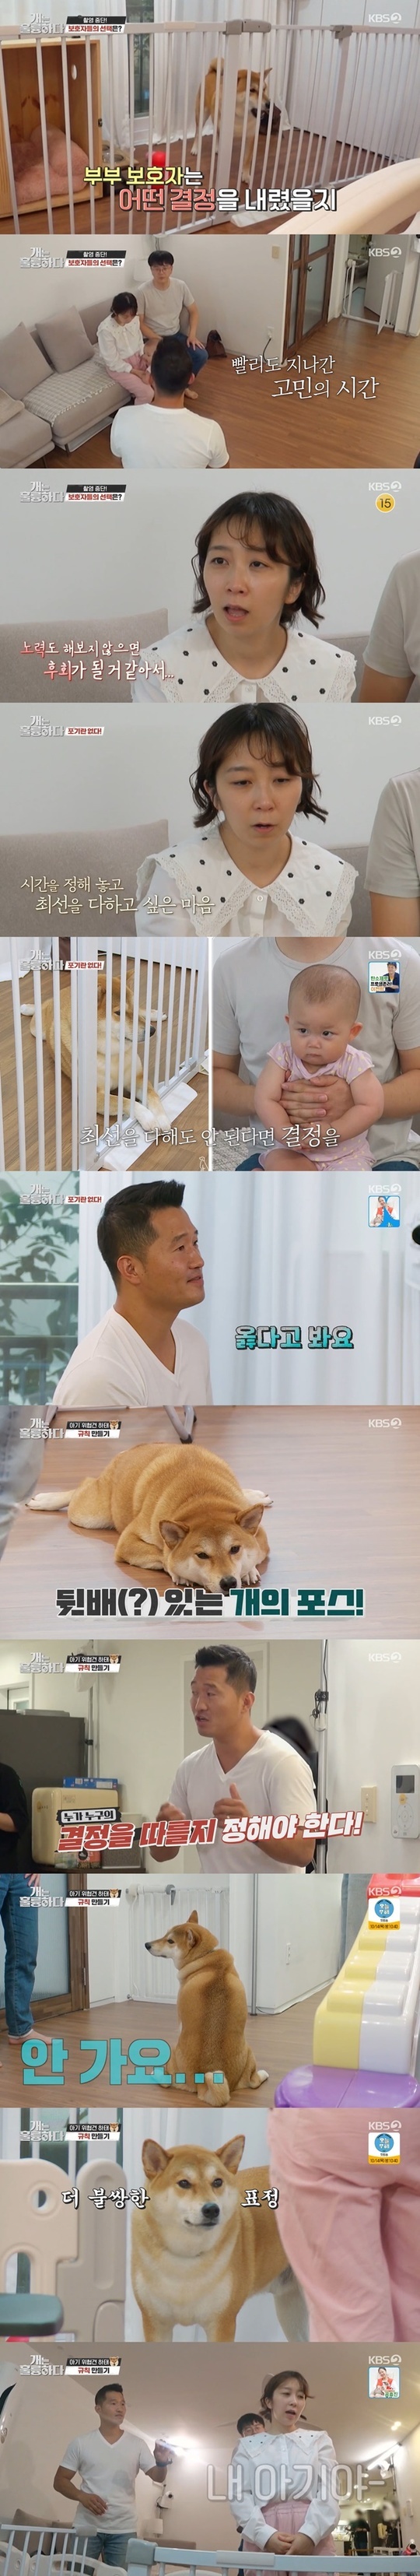 Guardian decides to symbiotic with Shiba Inu who threatens babyOn KBS 2TV Dogs Are Incredible (hereinafter referred to as Gaeulung), which was broadcast on October 11, the second story of Shiba Inu Hata, which reveals a vigilance to the baby, was drawn.The back story of Shiba Inu Hata, who attacked the baby on the day, was drawn.Hata showed strong aggression toward the born baby, and Kang Hyung-wook  trainer said, If you really want to love and protect, you have to look objectively.The most dangerous thing now is the mother Guardians behavior. You have to tell him exactly what you love and love him. Hes a precious child.If you bite the child, you will not be in this world. He said, You have to clean up your mind. Kang Hyung-wook  trainer stopped shooting for 20 minutes, taking into consideration the time for Guardians Choices.Mum Guardian wept, saying: I think its my fault, while dad Guardian comforted her as the fault of all the family.Finally, 20 minutes after the appointment, the Kang Hyung-wook  trainer reappeared.Mom Guardian said, When we think about it, there is an expectation that Hata will be a training to some extent, and above all, I think I should try hard to feel comfortable later.I think it is a good time because my husband is in the house with Guardian fortunately taking a parental leave this year.I can not take this problem with my greed, so I will set the time and do what I can to do my best during that time.  If the babys safety problem is going to continue, then I think it will not be too late to think about finding a better Guardian for Hata. Kang Hyung-wook , a trainer, said, I was nervous about what kind of Choices you would do. I am comfortable.Thank you, he nodded.In addition, Kang Hyung-wook  trainer recommended Hata to have a separate space and walk at least 4 days a day without allowing the baby to walk around.However, Kang Hyung-wook  emphasized, The room is never allowed. Hataes room was decided as a balcony.Also, the Guardians began to make rules for Hattai: Kang Hyung-wook  said, We have to decide who will follow.We need to know that the family is in the highest position. In the meantime, the family is trying to control the house by matching the For of Hata. Mom Guardian started to organize with Hata by learning a little strong blocking.